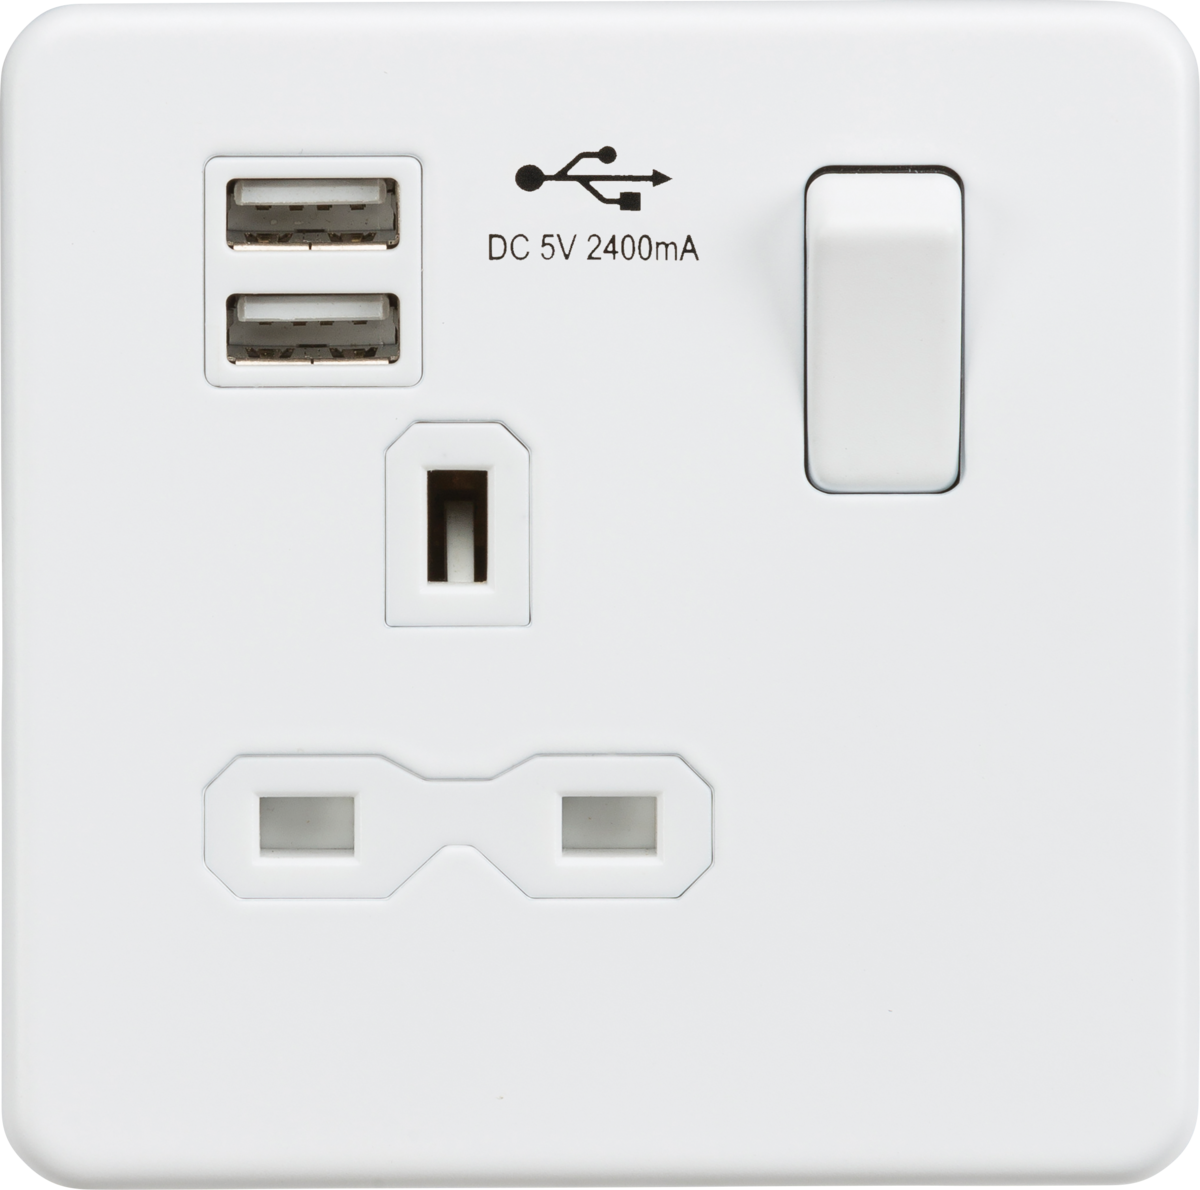 Knightsbridge Screwless 13A 1G switched socket with dual USB Charger 2.4A